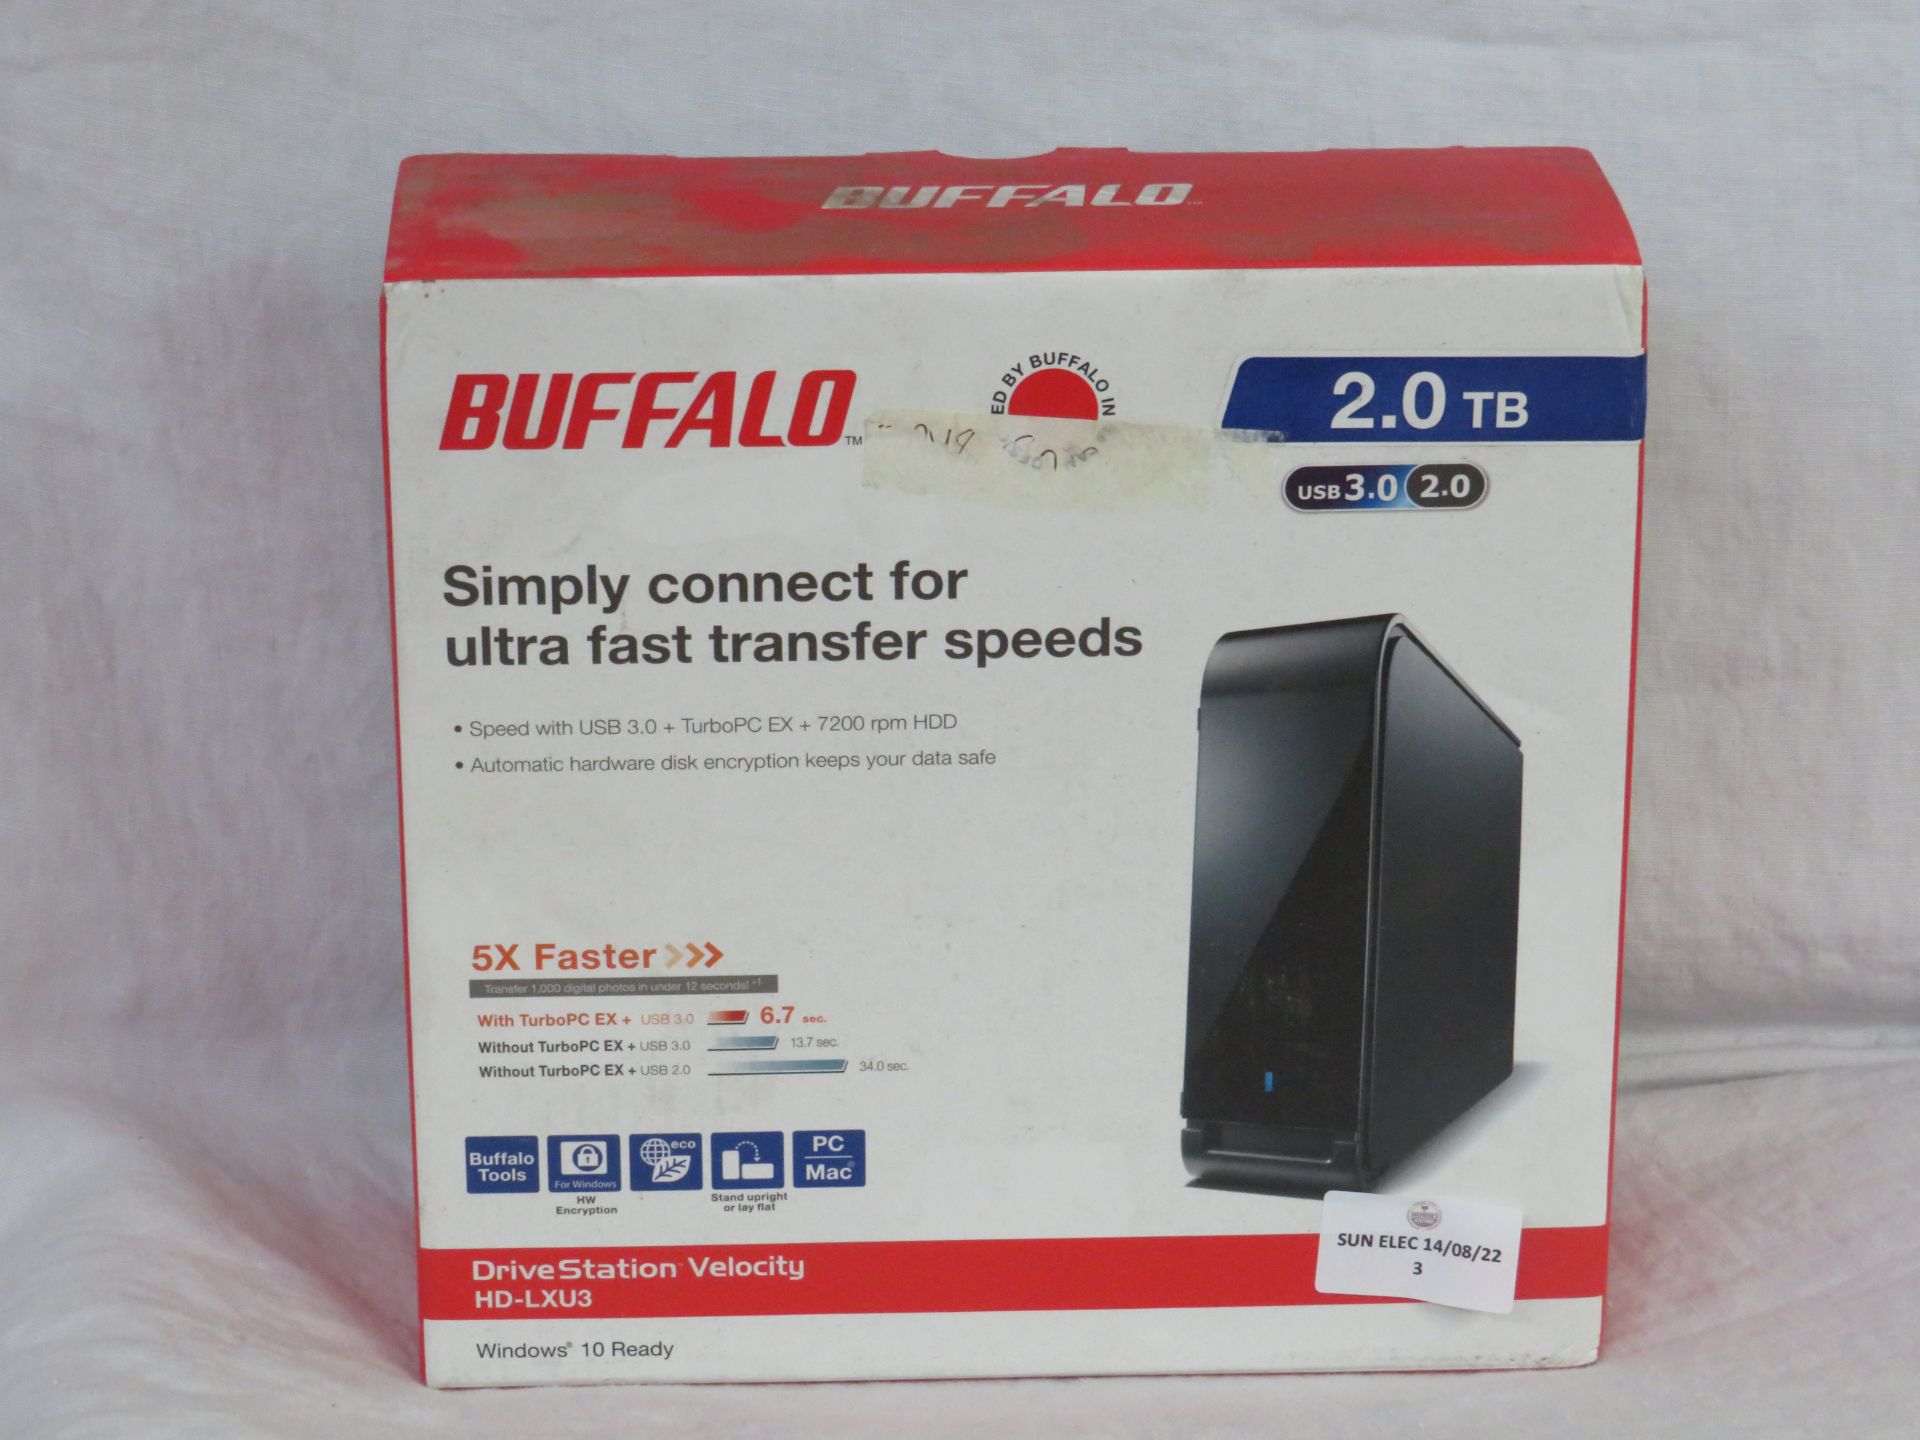 Buffalo 2TB ultra fast transfer speed USB 3.0/2.0 hub, unchecked and boxed.